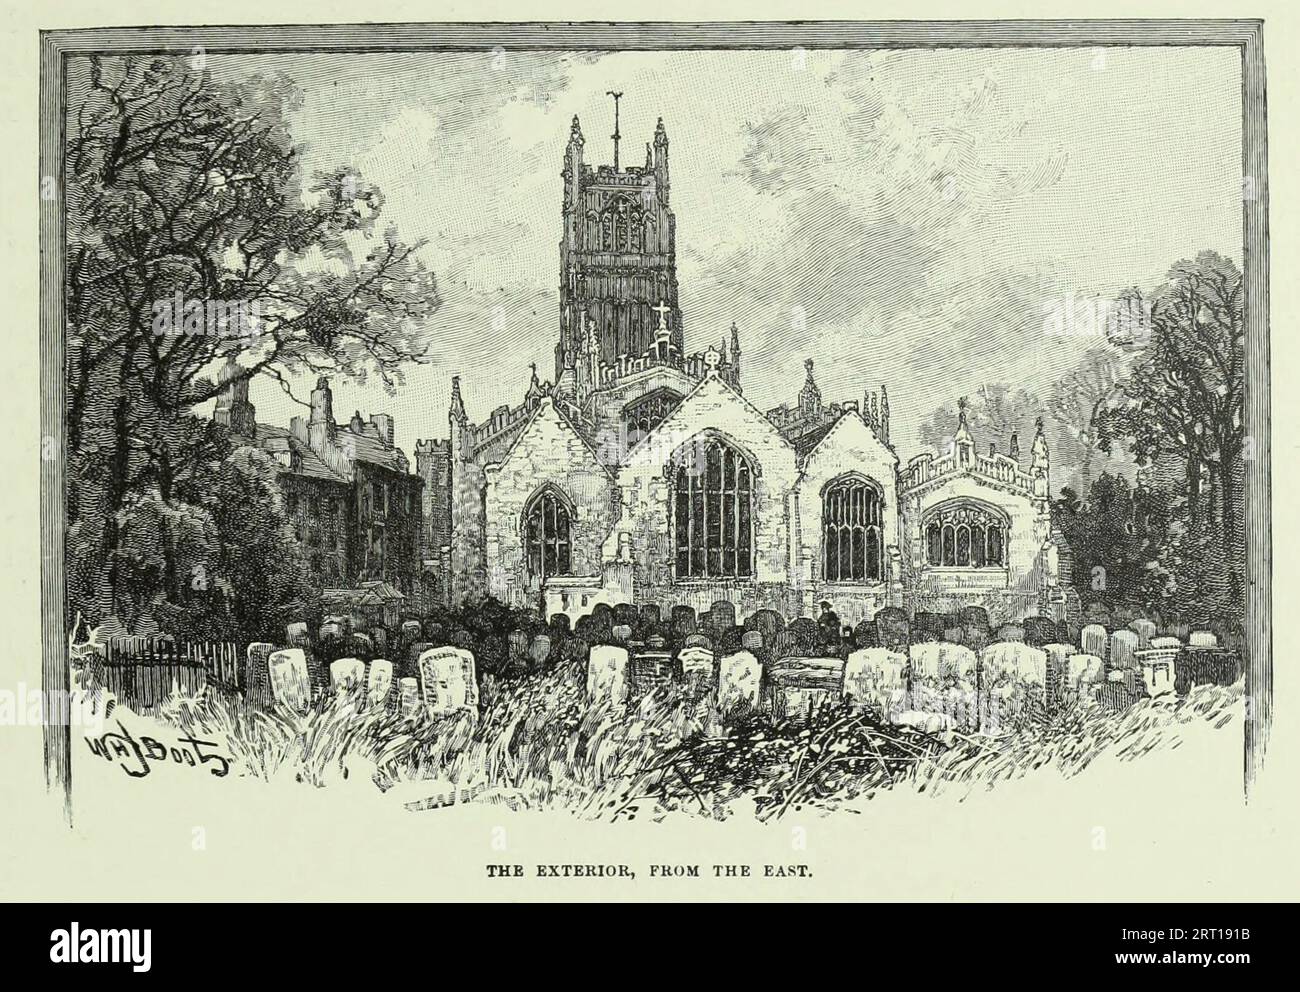 THE EXTERIOR, FROM THE EAST. Church of St. John the Baptist, Cirencester is a market town in Gloucestershire, England, from the book ' Cathedrals, abbeys and churches of England and Wales : descriptive, historical, pictorial ' by Bonney, T. G. (Thomas George), 1833-1923; Publisher London : Cassell 1890 Stock Photo